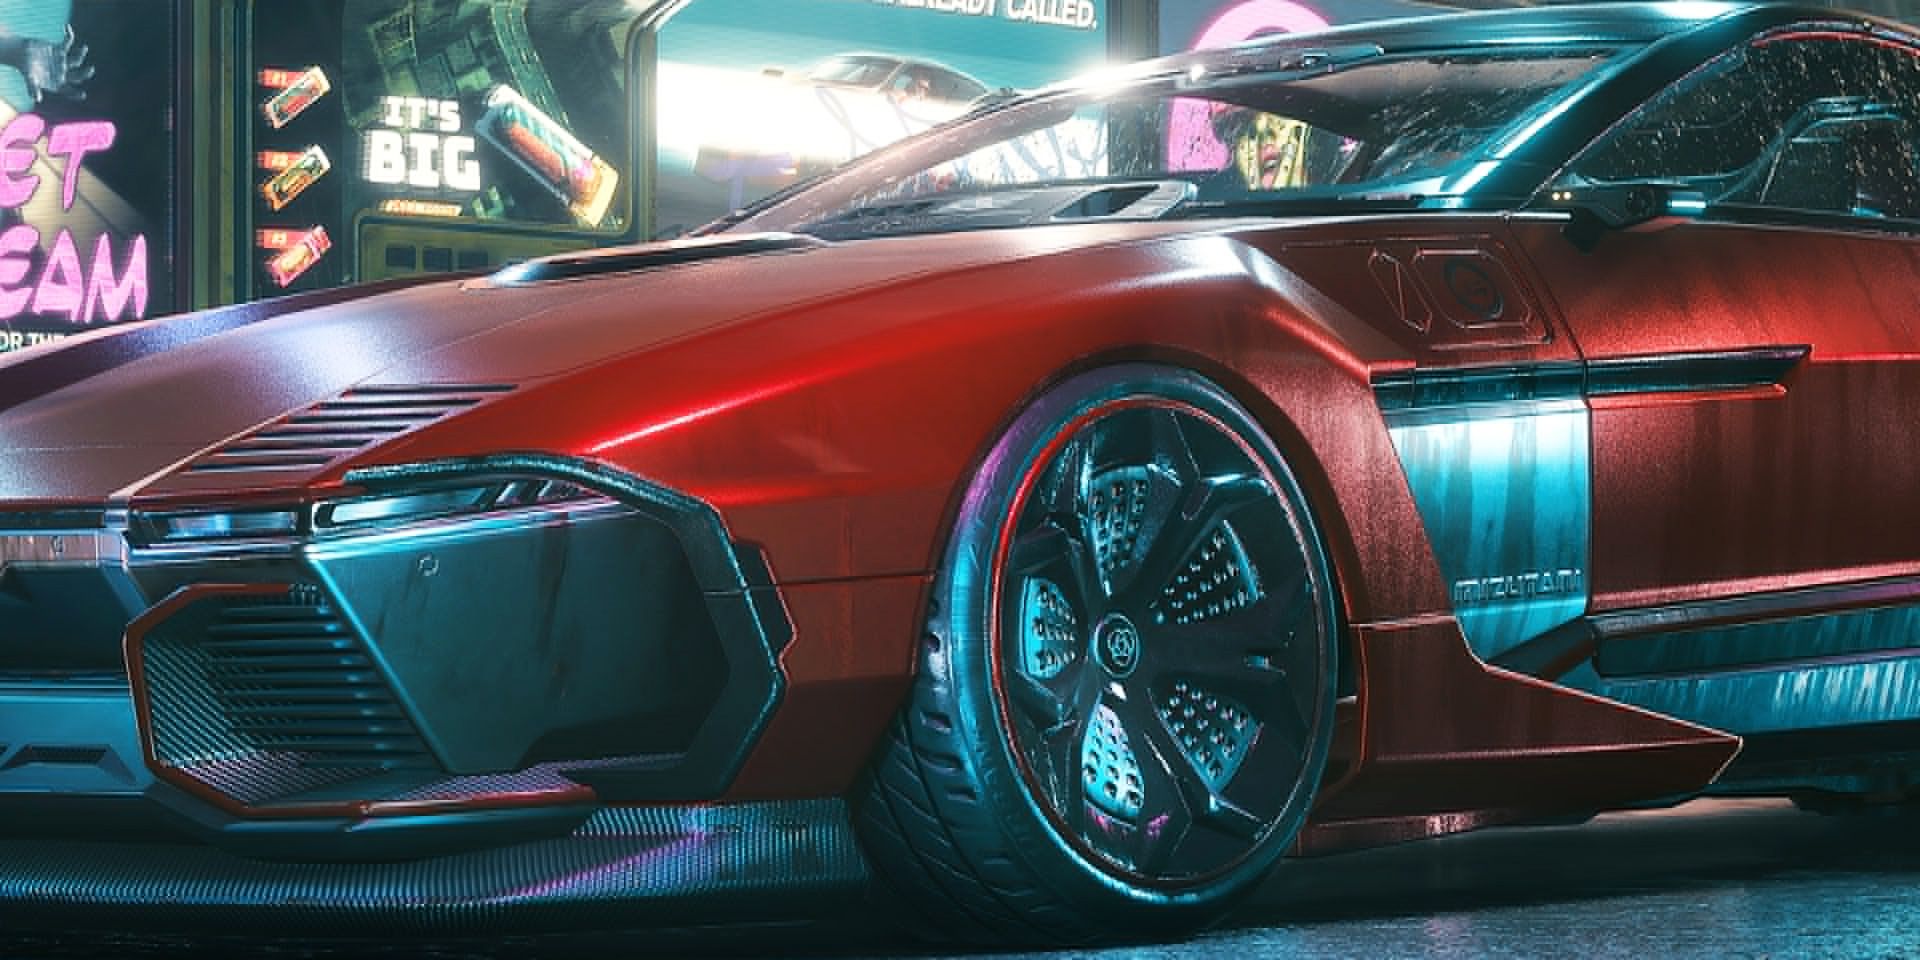 Cyberpunk 2077 Players Want To Be Able To Drive Takemura's Car